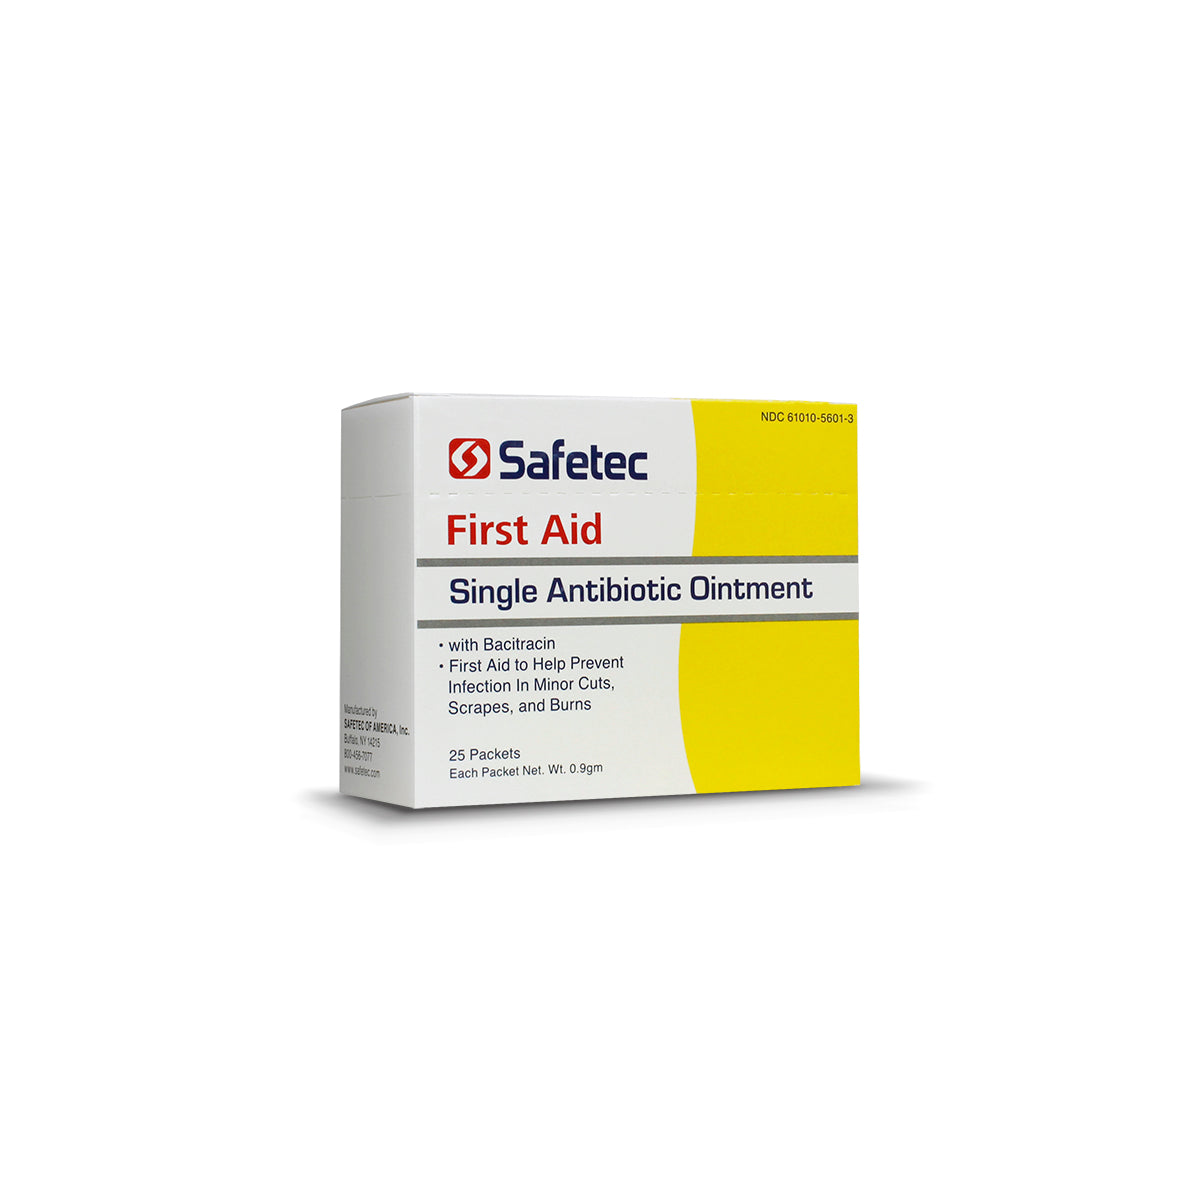 SafeTec - Single Antibiotic Ointment (Bacitracin)- .9g pouch data-zoom=